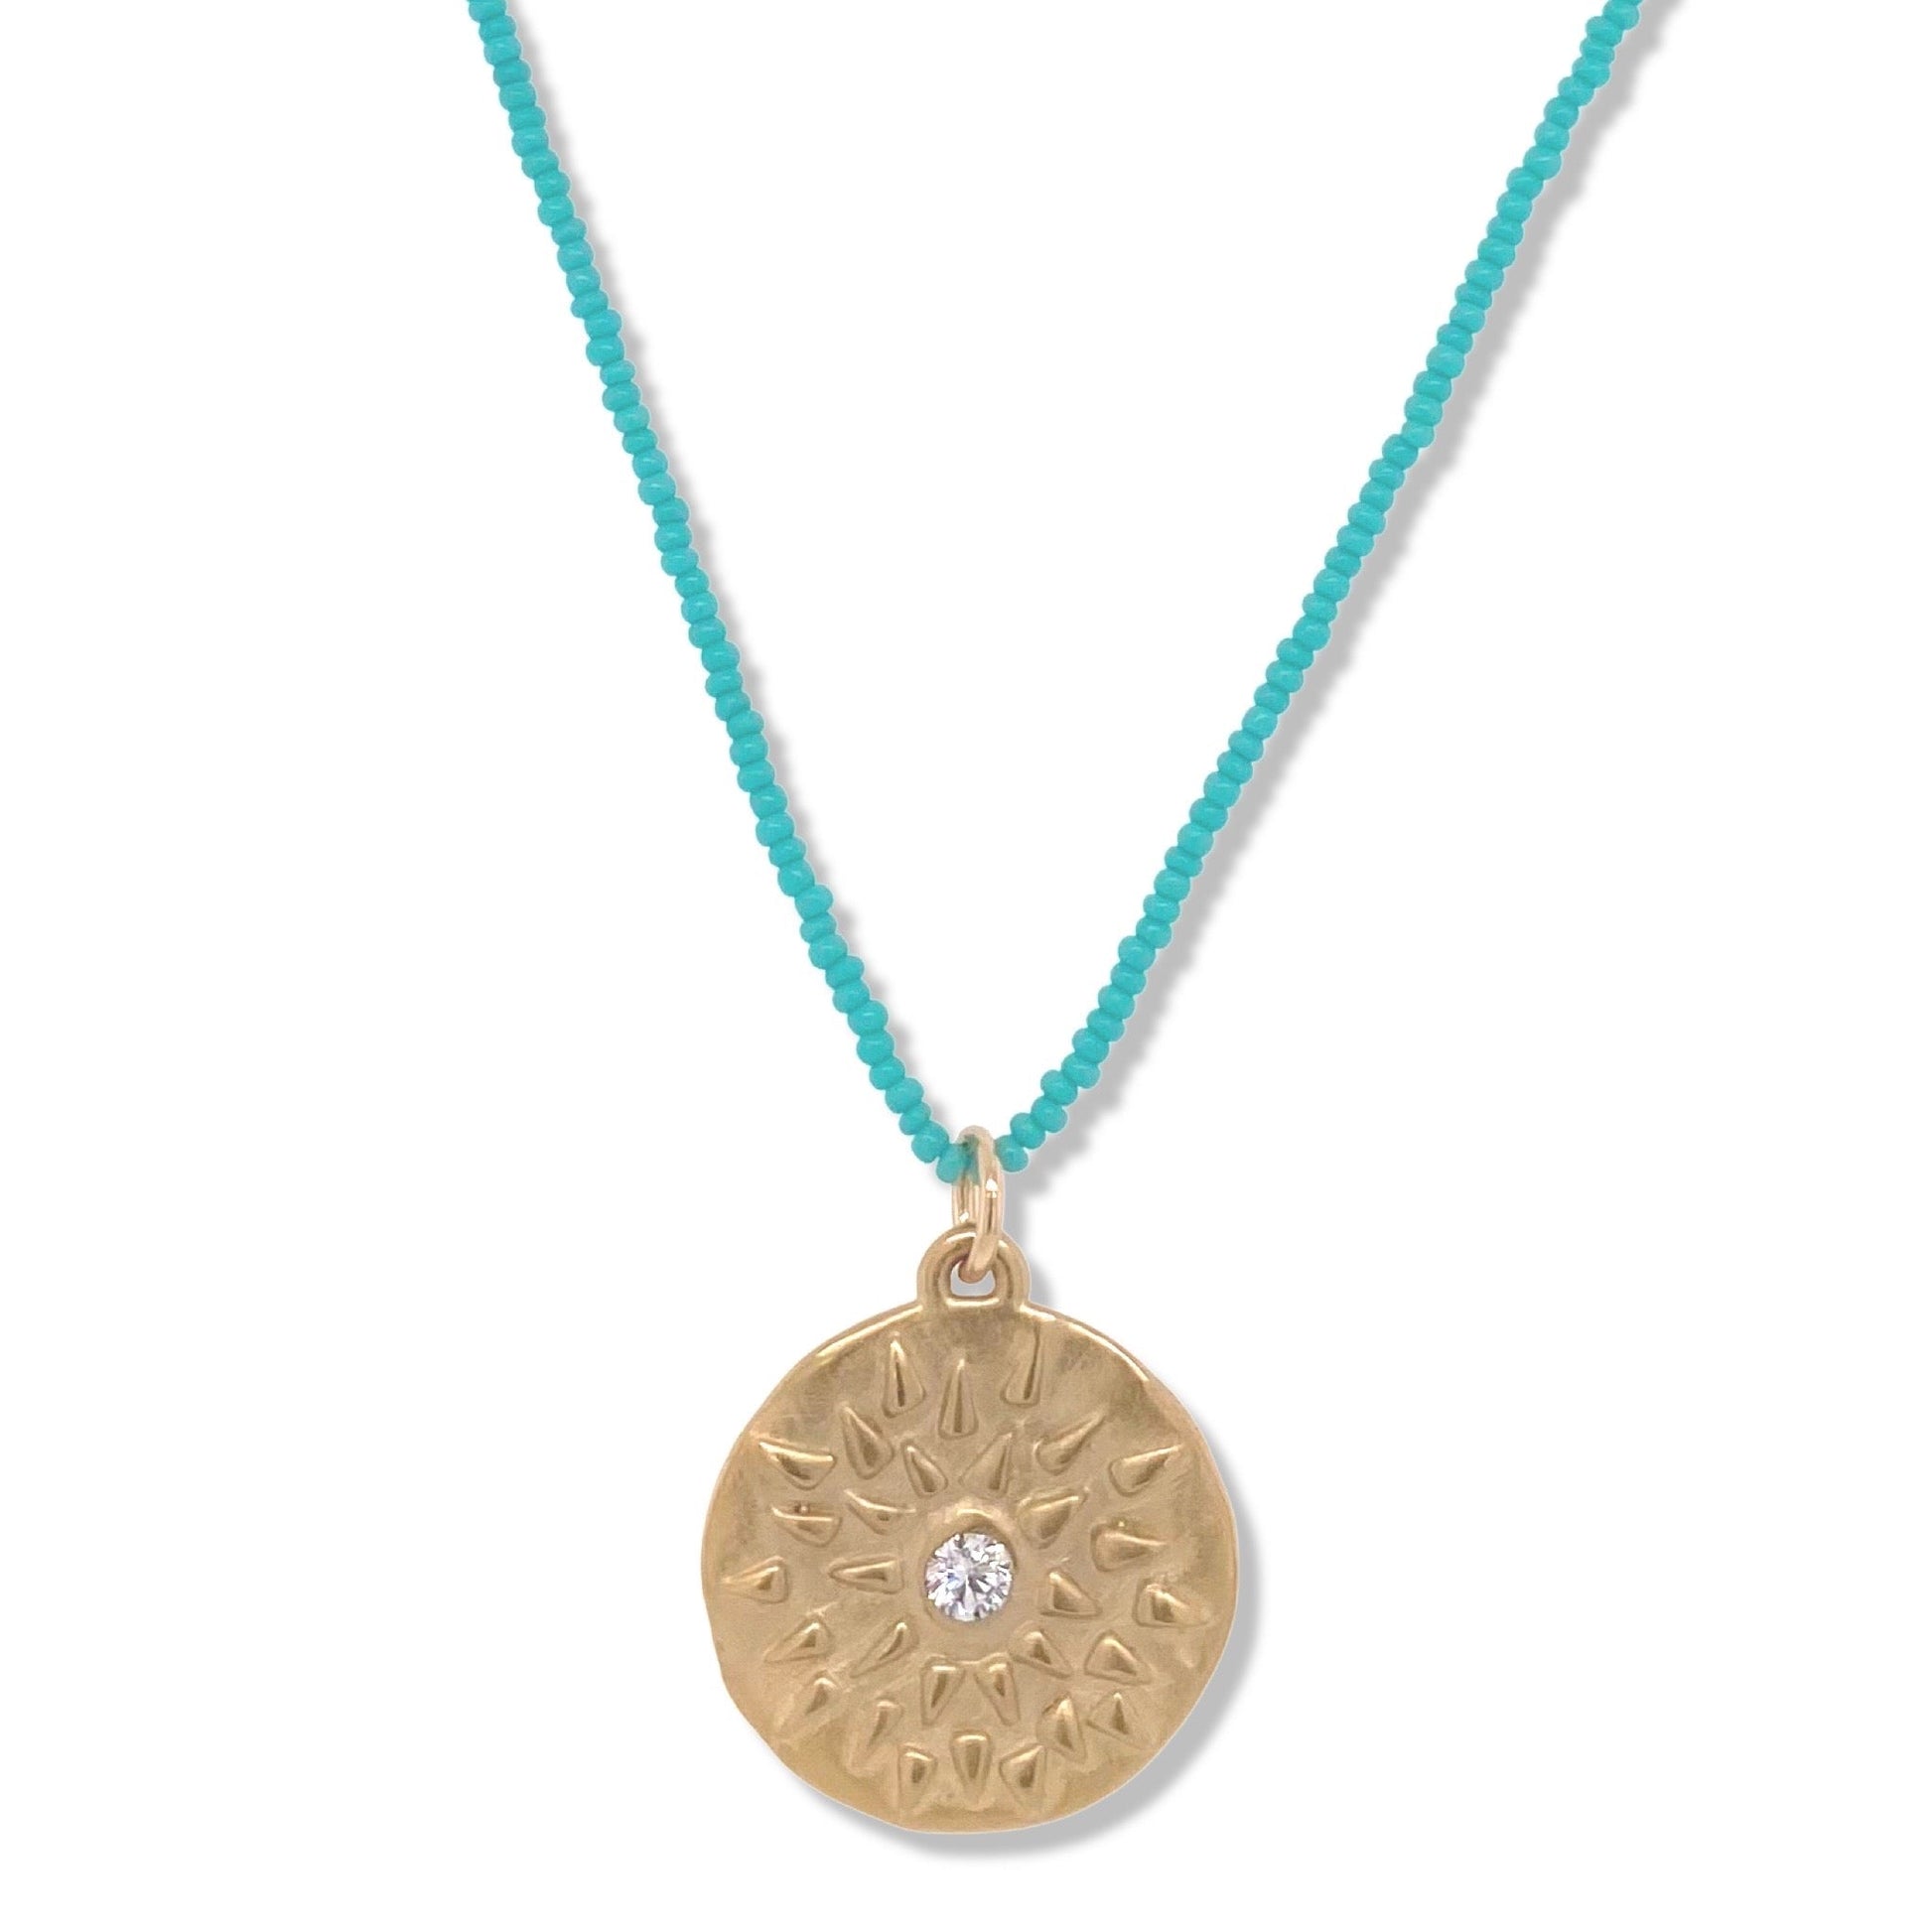 Mira Necklace in Gold on Turquoise Tiny Beads | Nalu | Nantucket